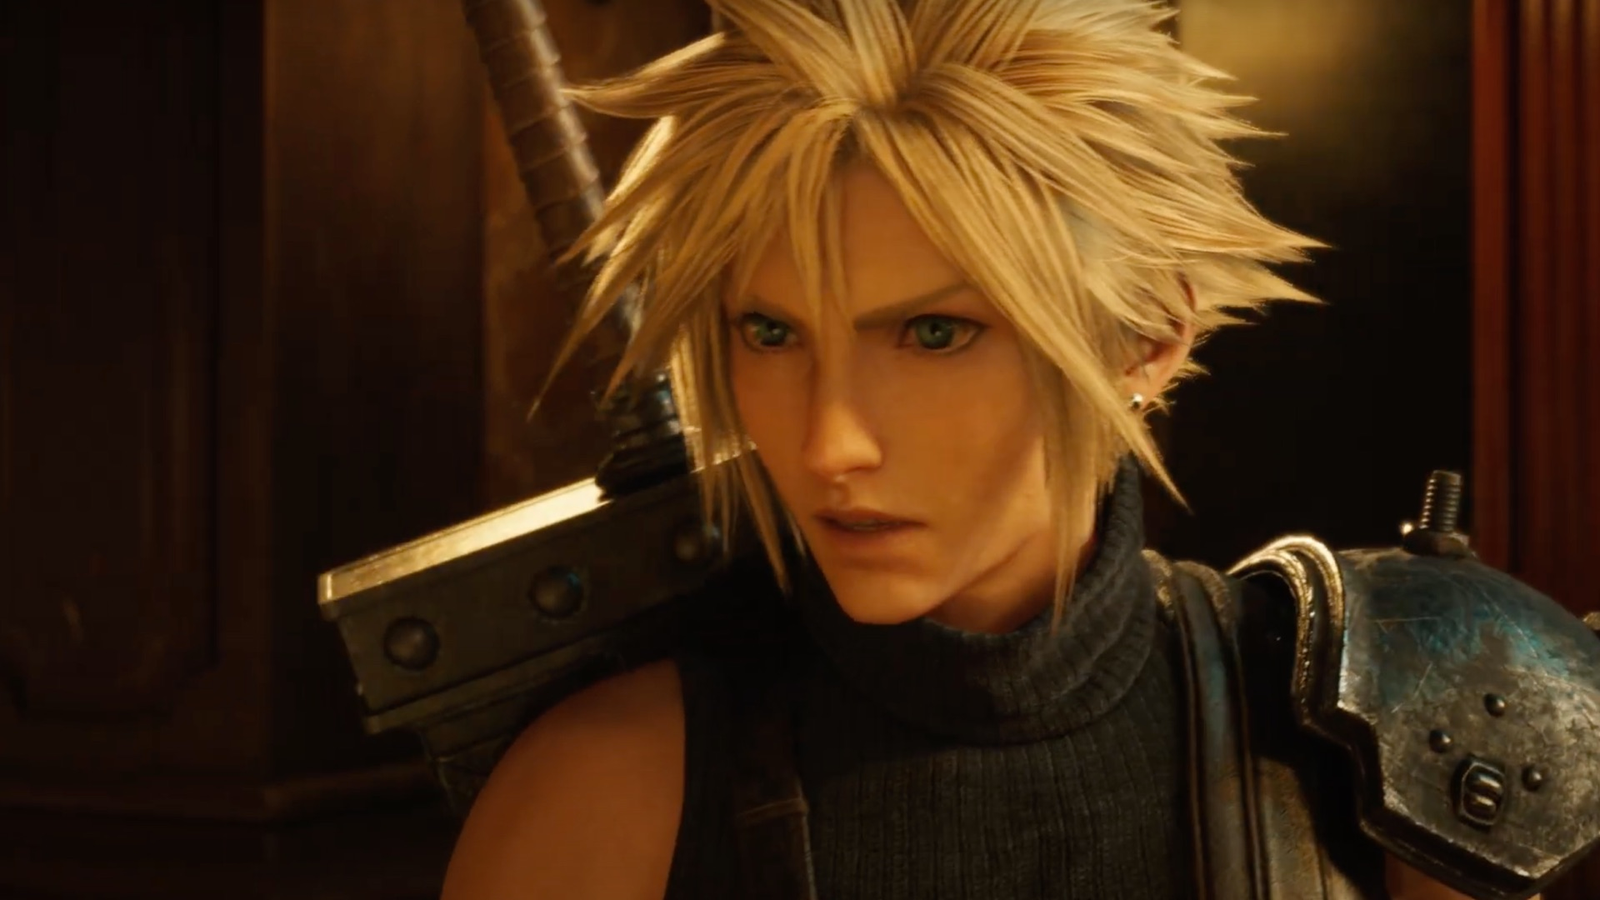 When Does Final Fantasy 7 Rebirth Come Out?